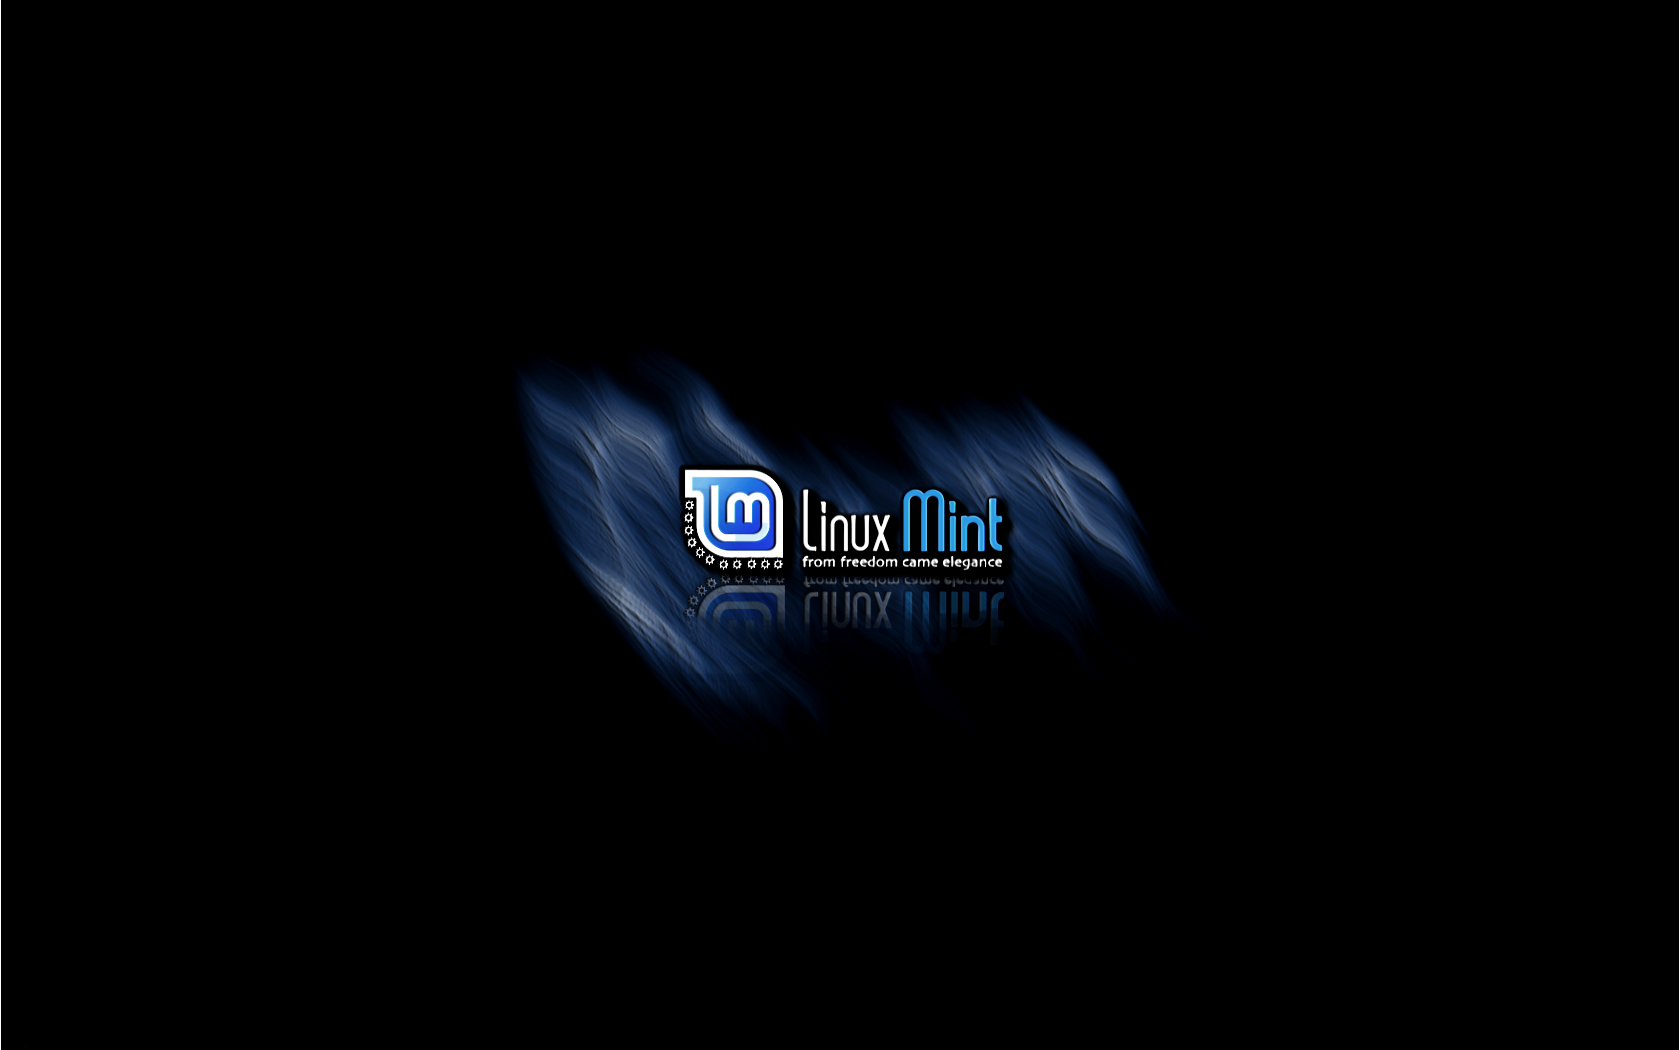 Mint Forums Topic Yet Another Kde Wallpaper Minty Blue